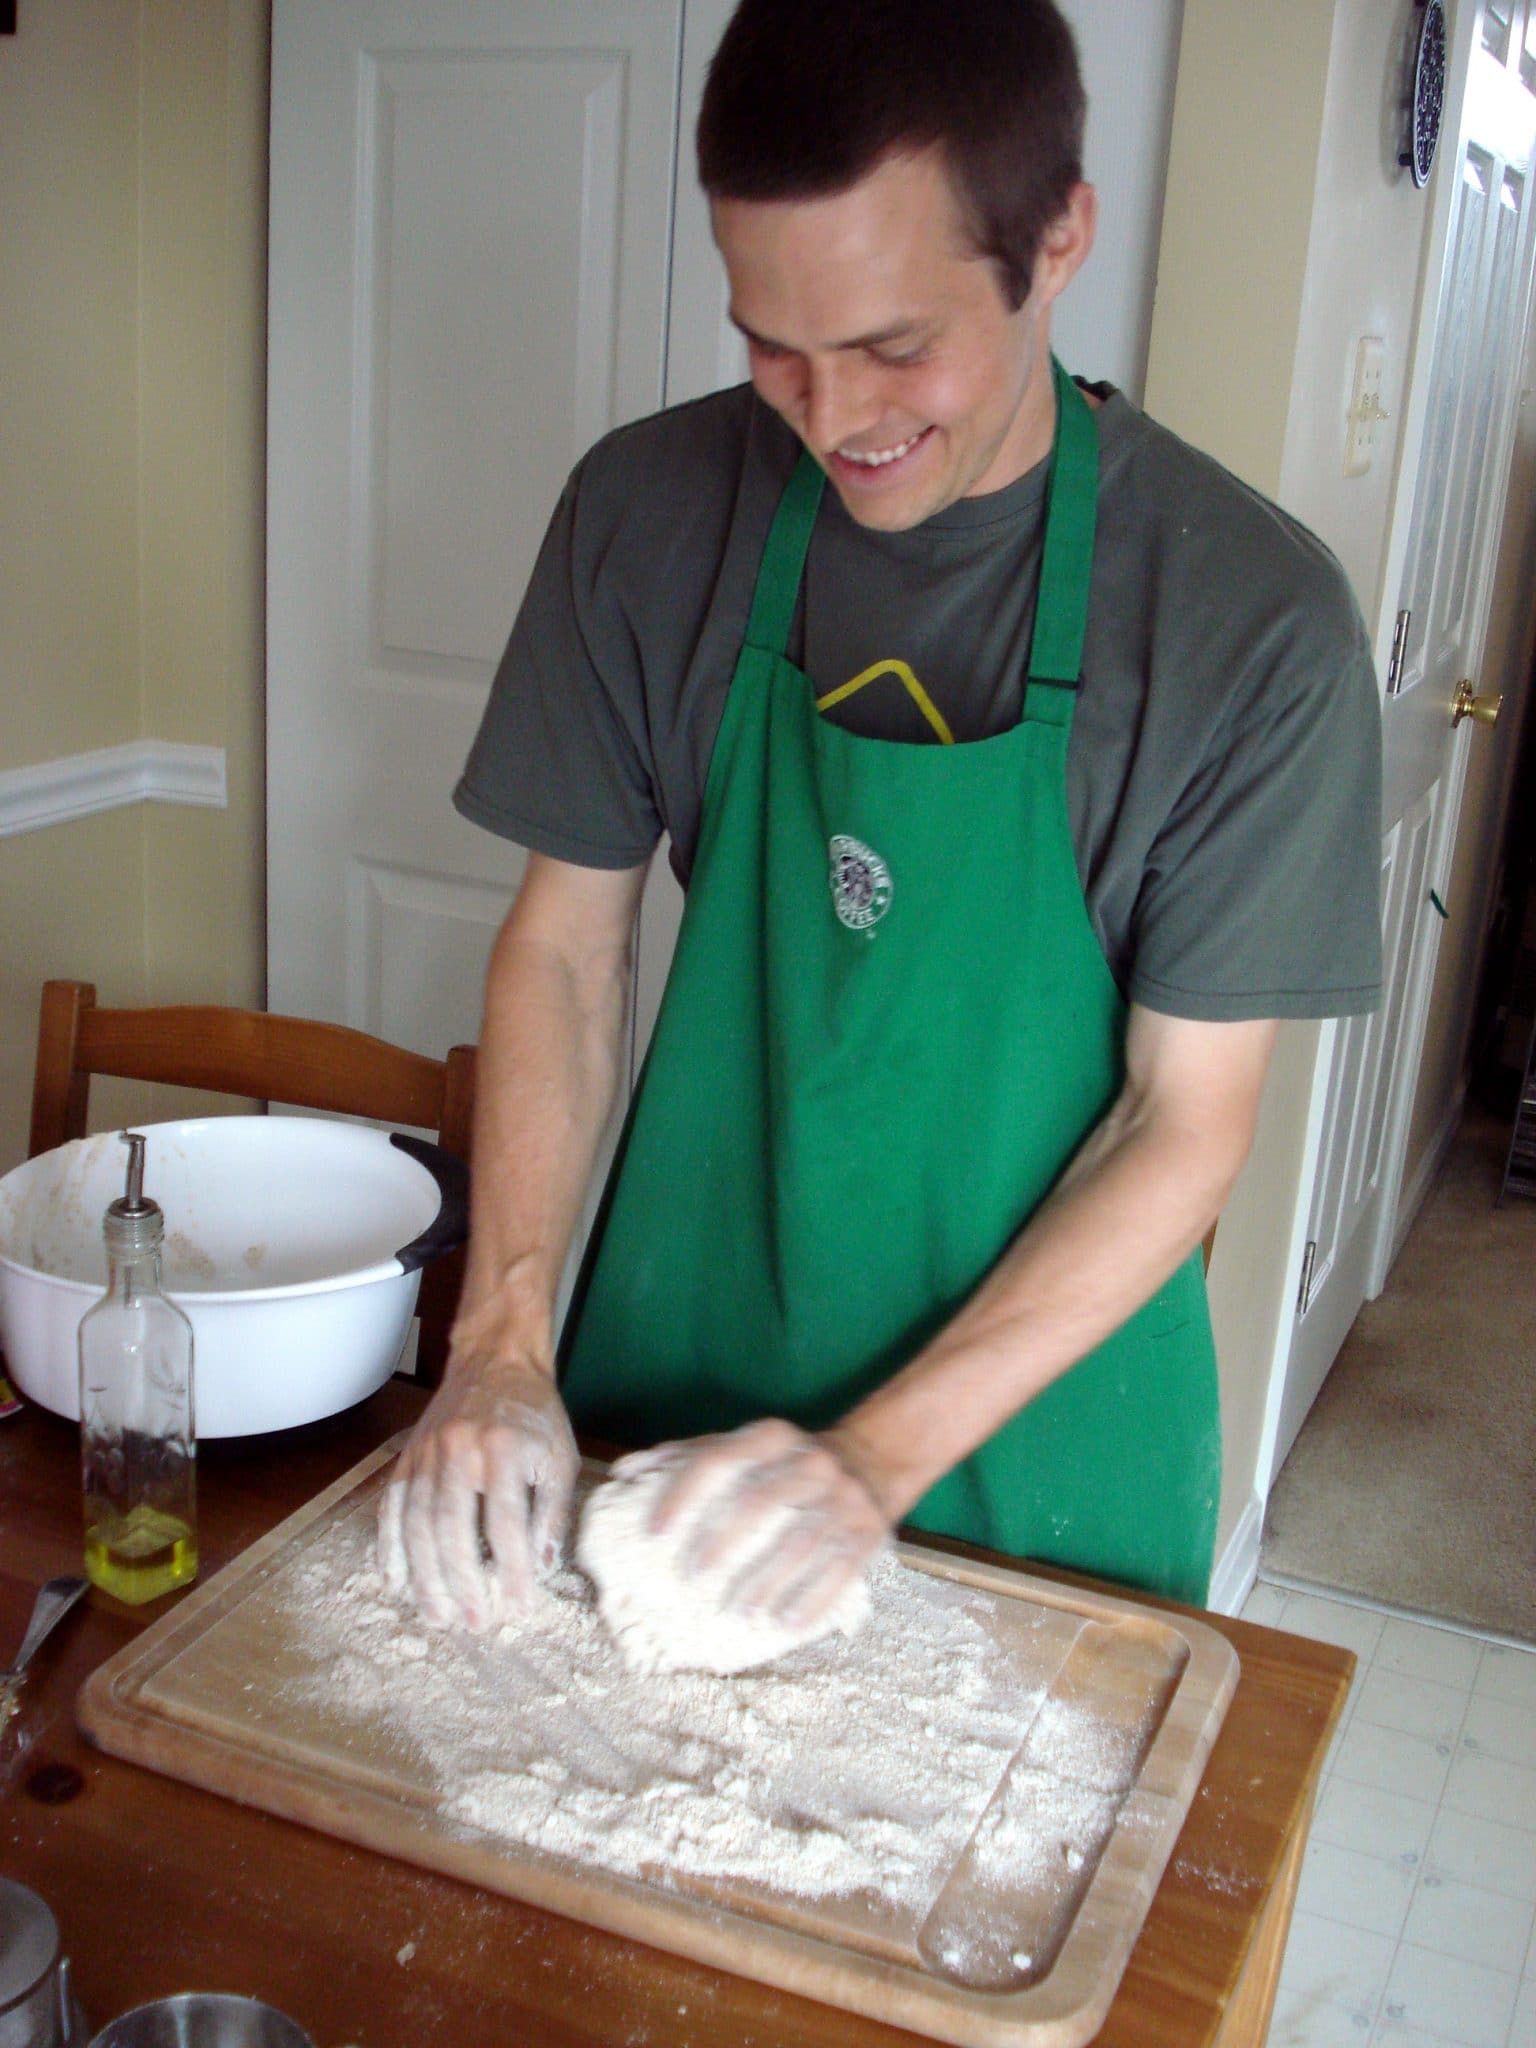 Matt kneading the pasta dough by hand on floured counter space